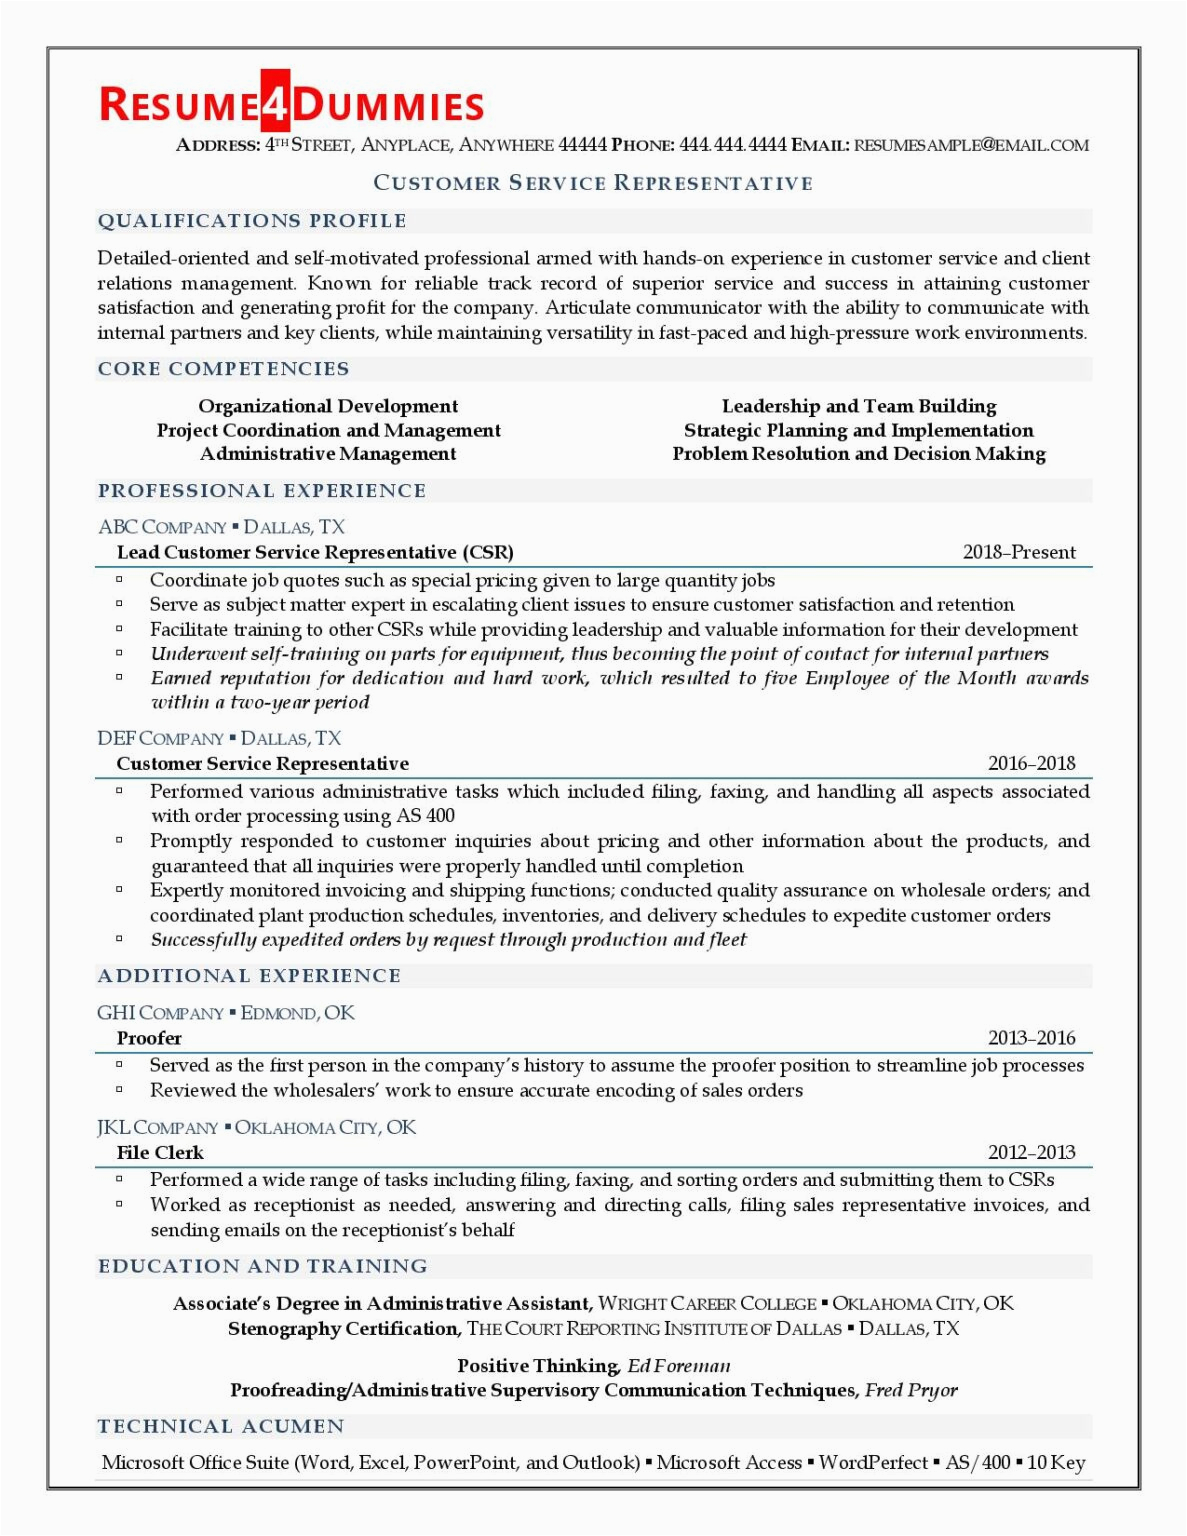 Sample Resumes for Jobs In Customer Service Customer Service Representative Resume